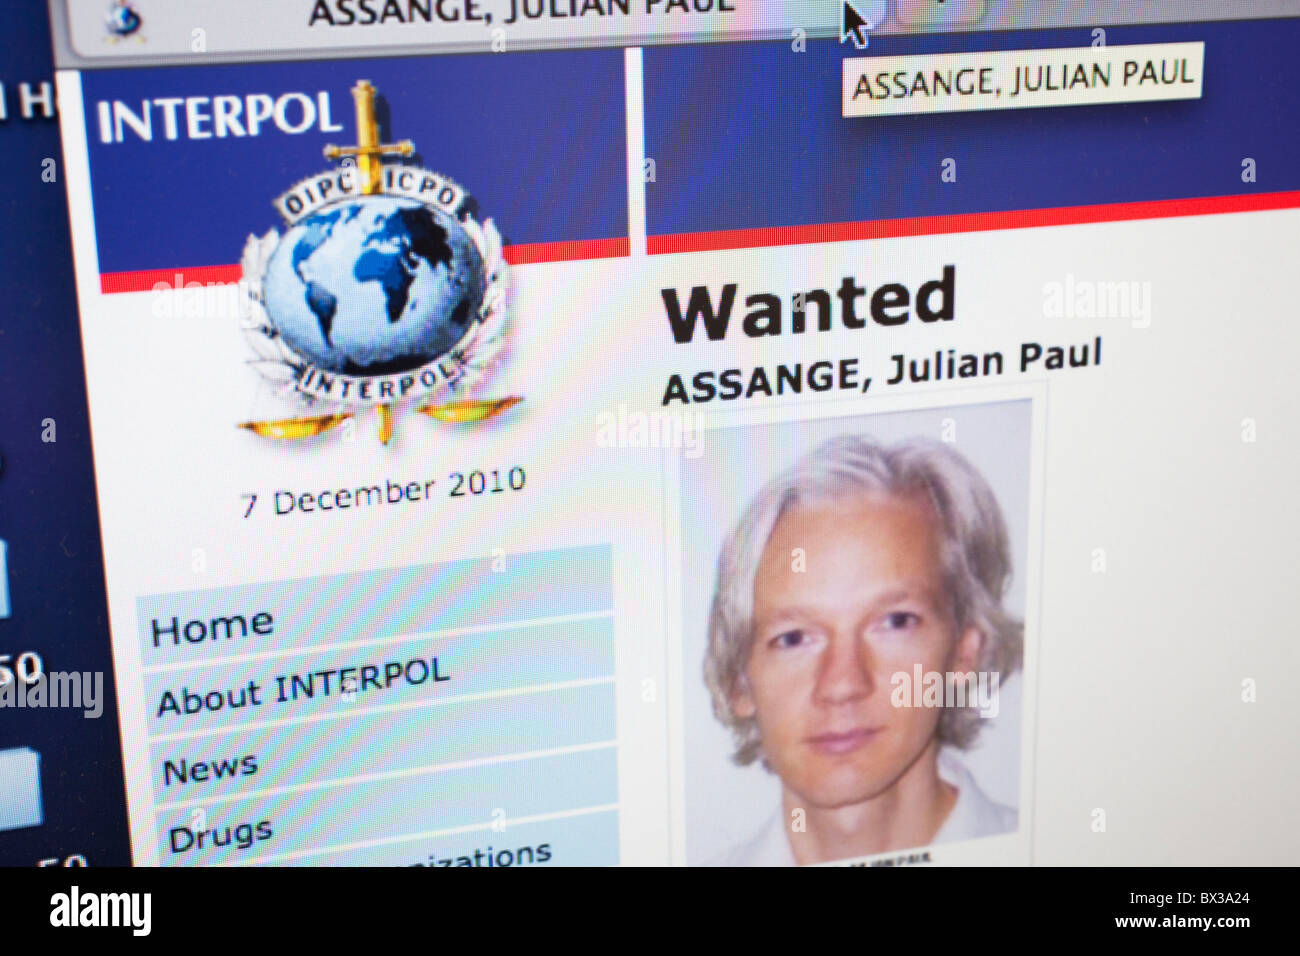 Website for Interpol shows Julian Assange's status as Wanted. Founder of the whistle-blowing website Wikileaks, Julian Assange. Stock Photo